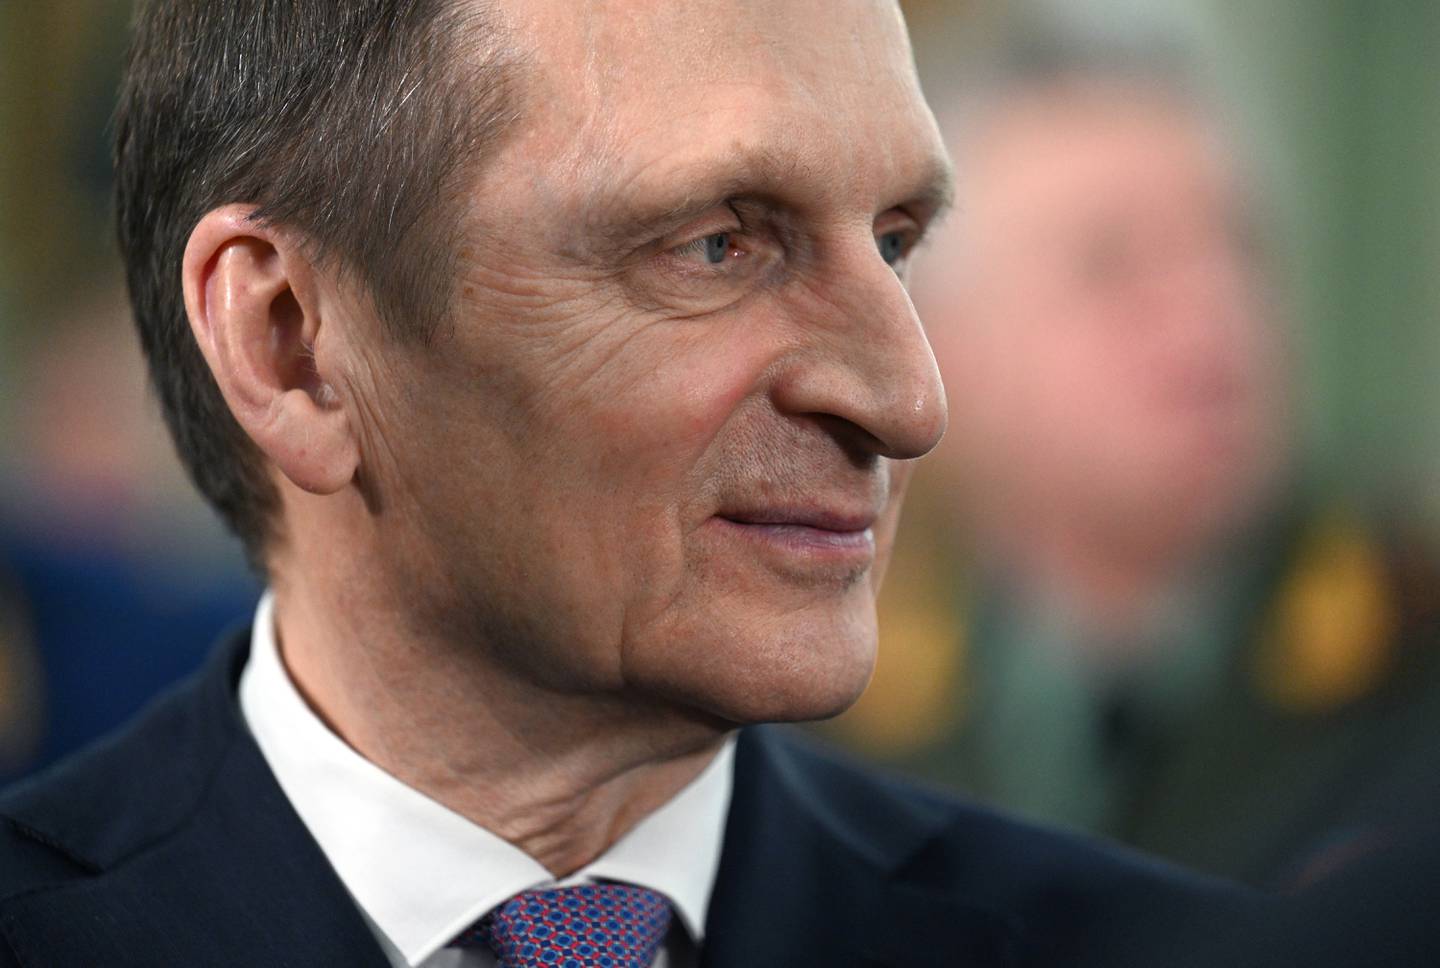 Sergei Naryshkin, head of the Russian Foreign Intelligence Service attends a meeting of the Prosecutor General's Office Board with Russian President Vladimir Putin in Moscow, Russia, Wednesday, March 15, 2023. (Pavel Bednyakov, Sputnik, Kremlin Pool Photo via AP)